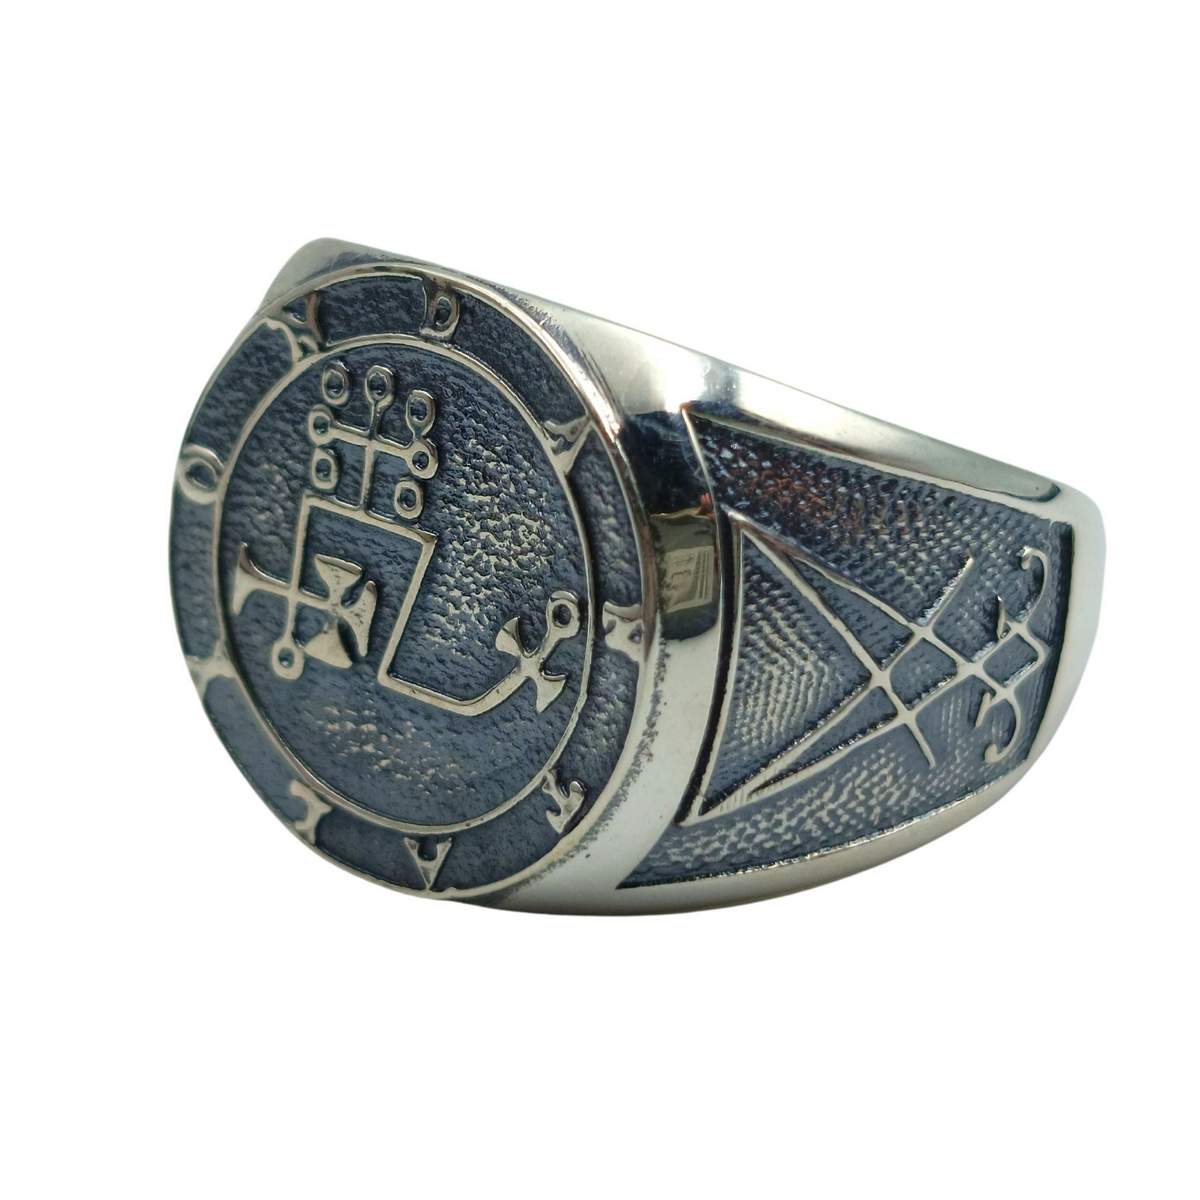 Dantalion sigil signet ring from silver